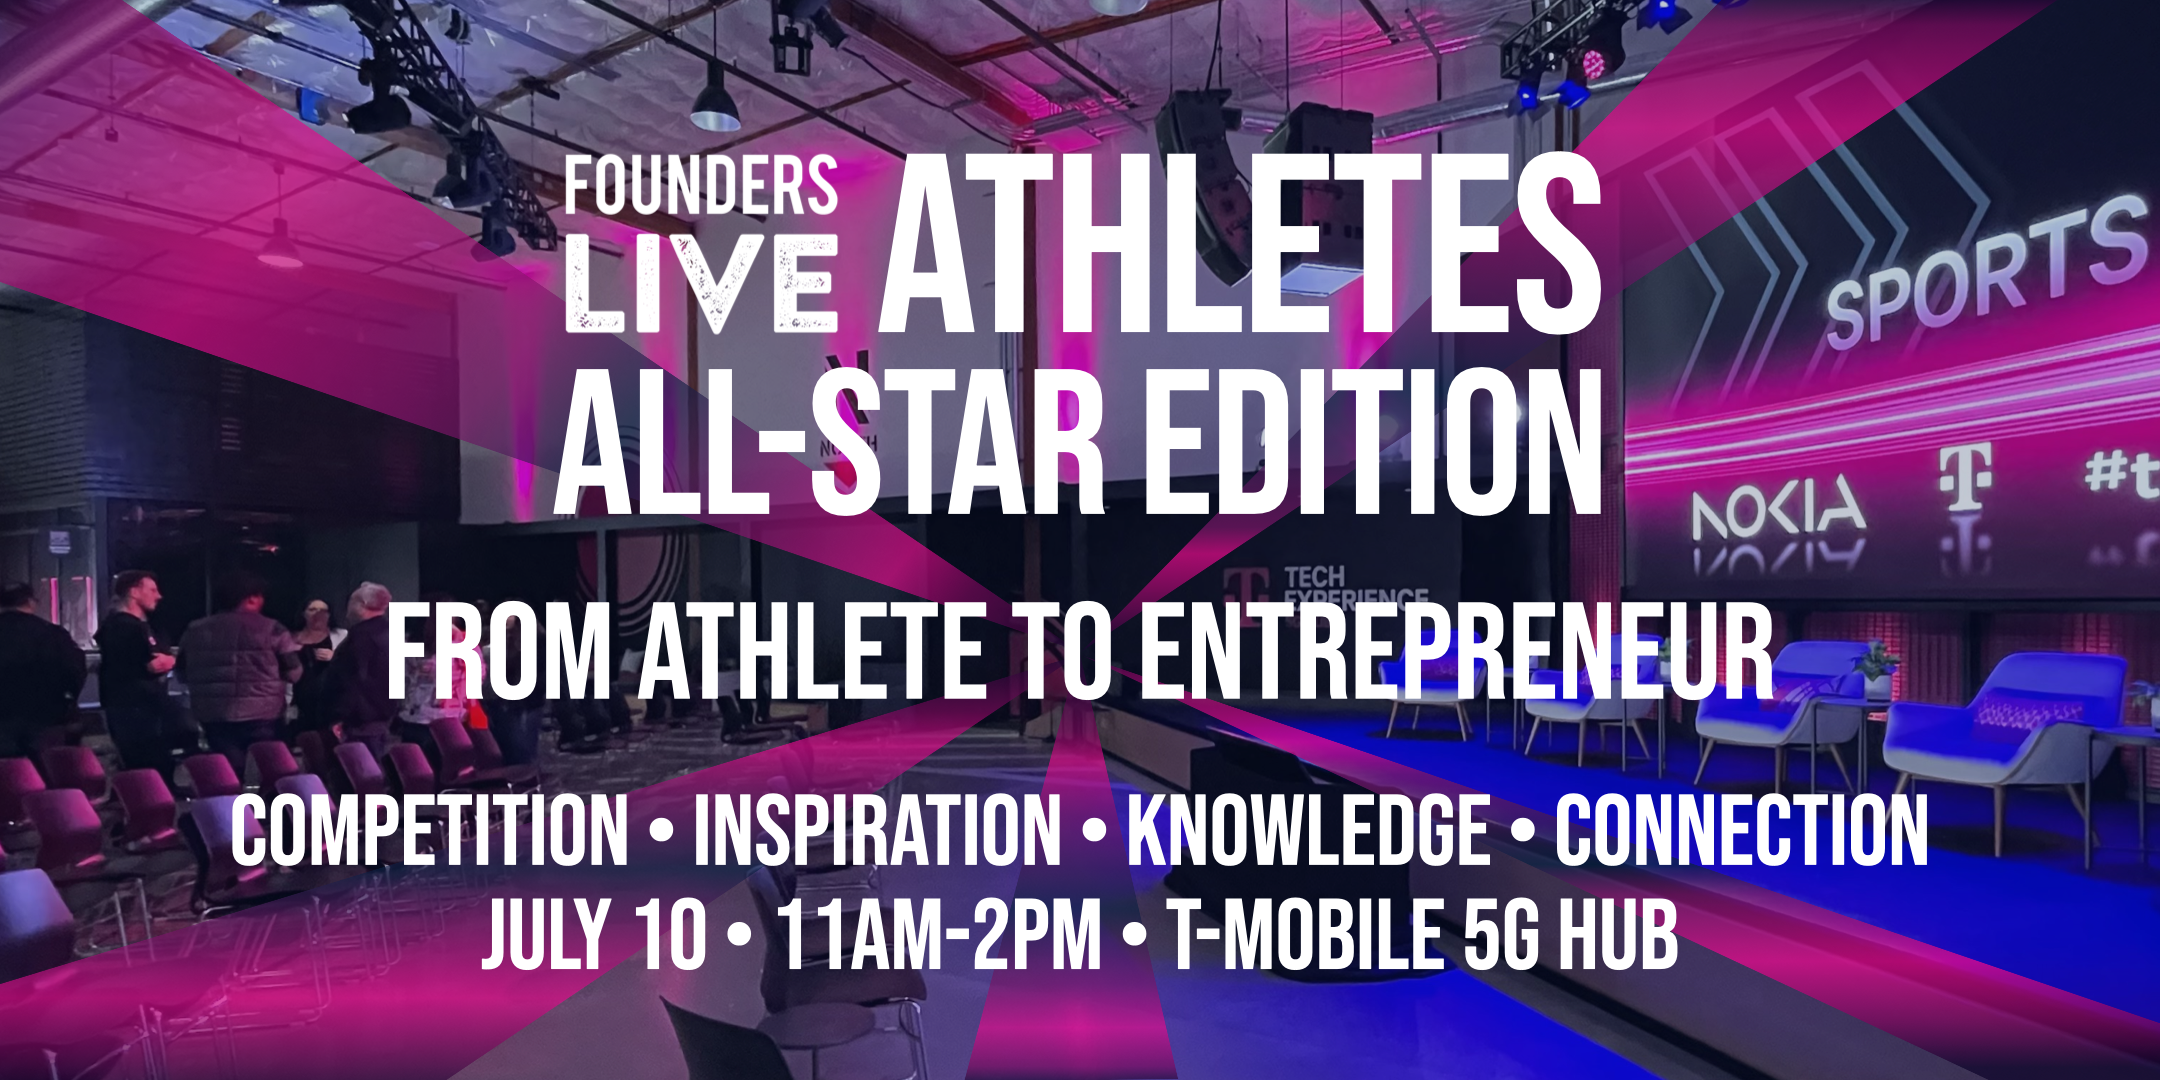 Founders Live Athletes